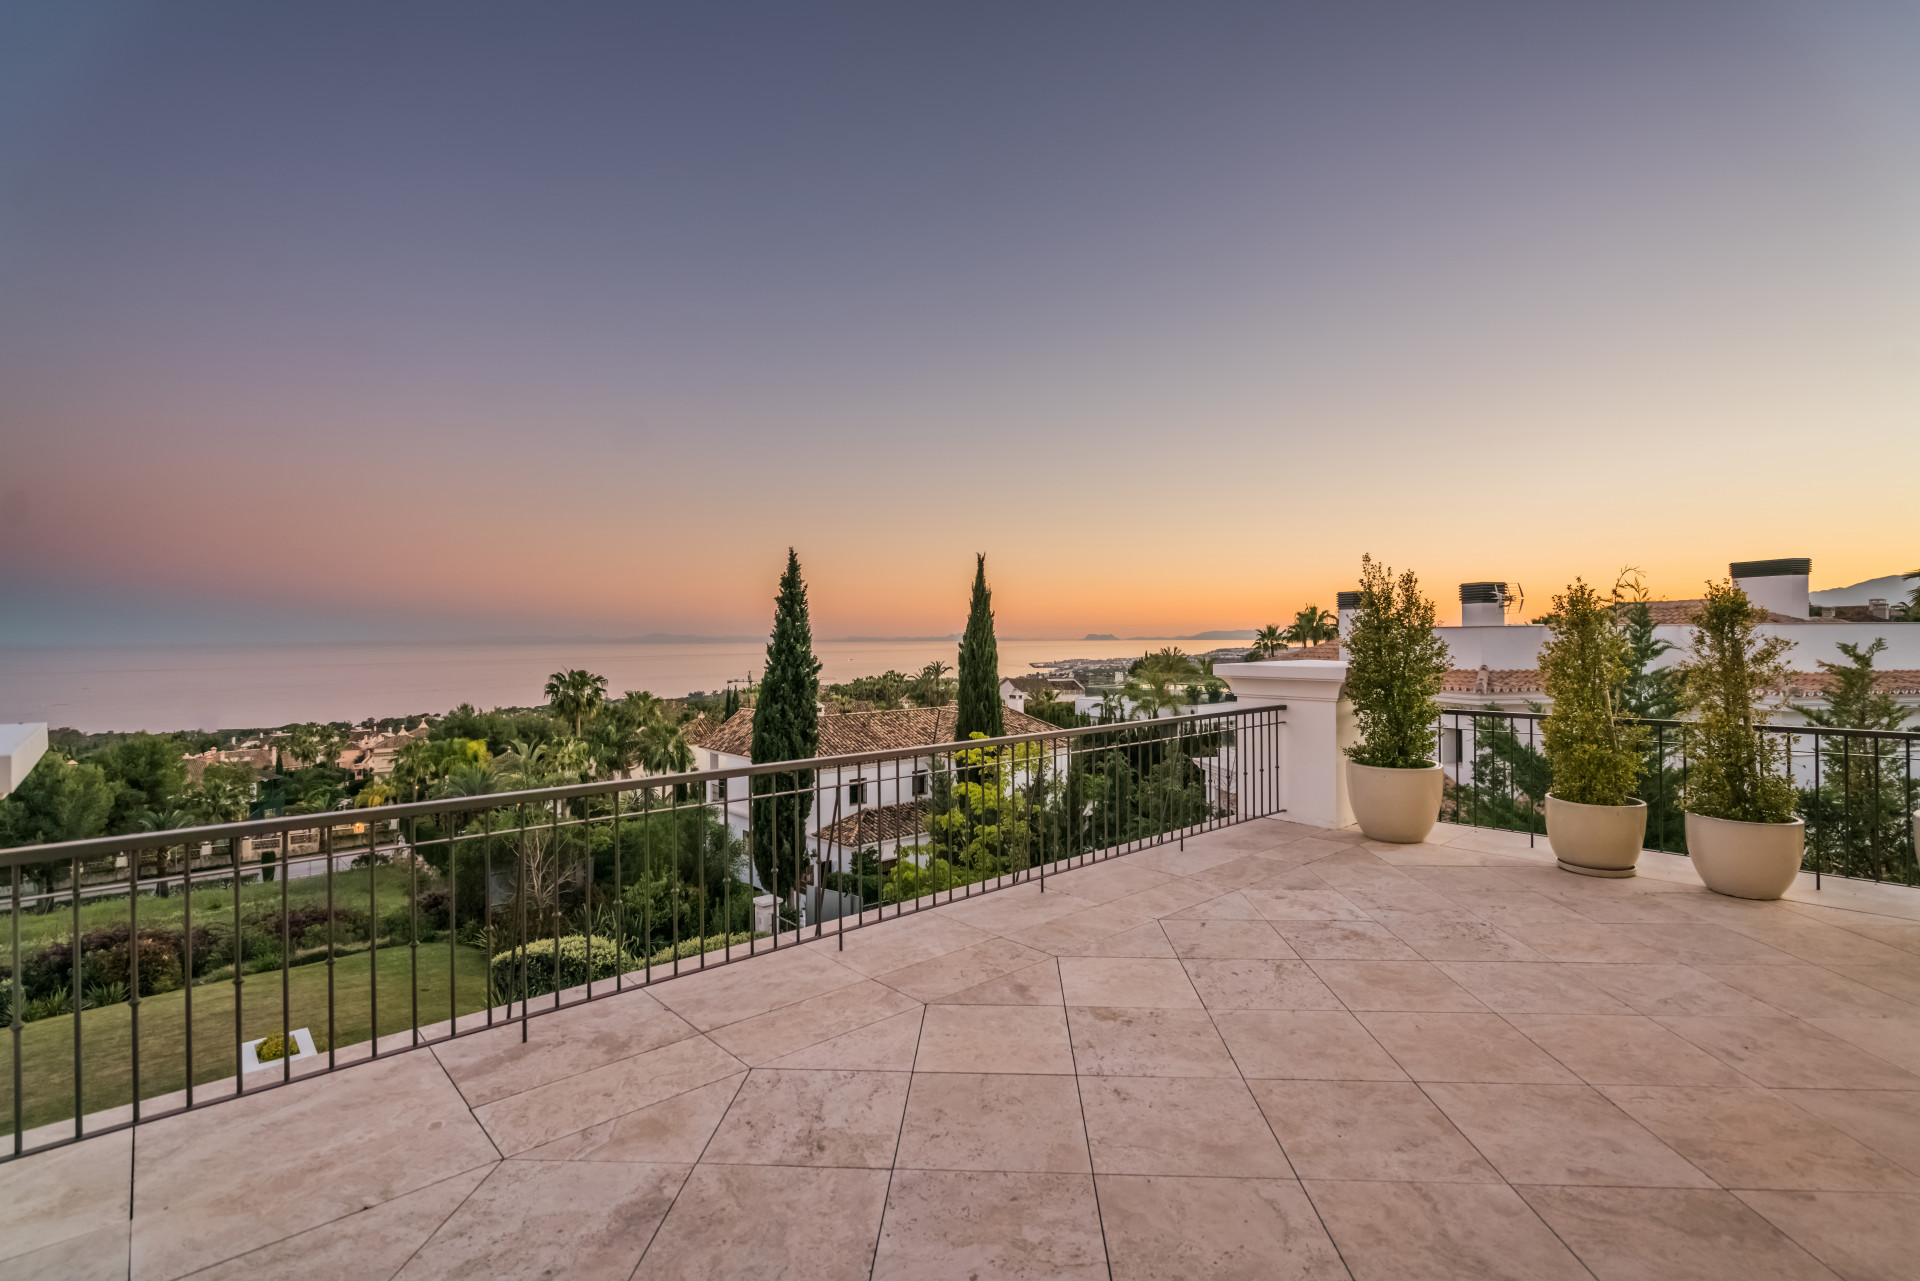 Modern Andalusian mansion for sale in Sierra Blanca – Marbella